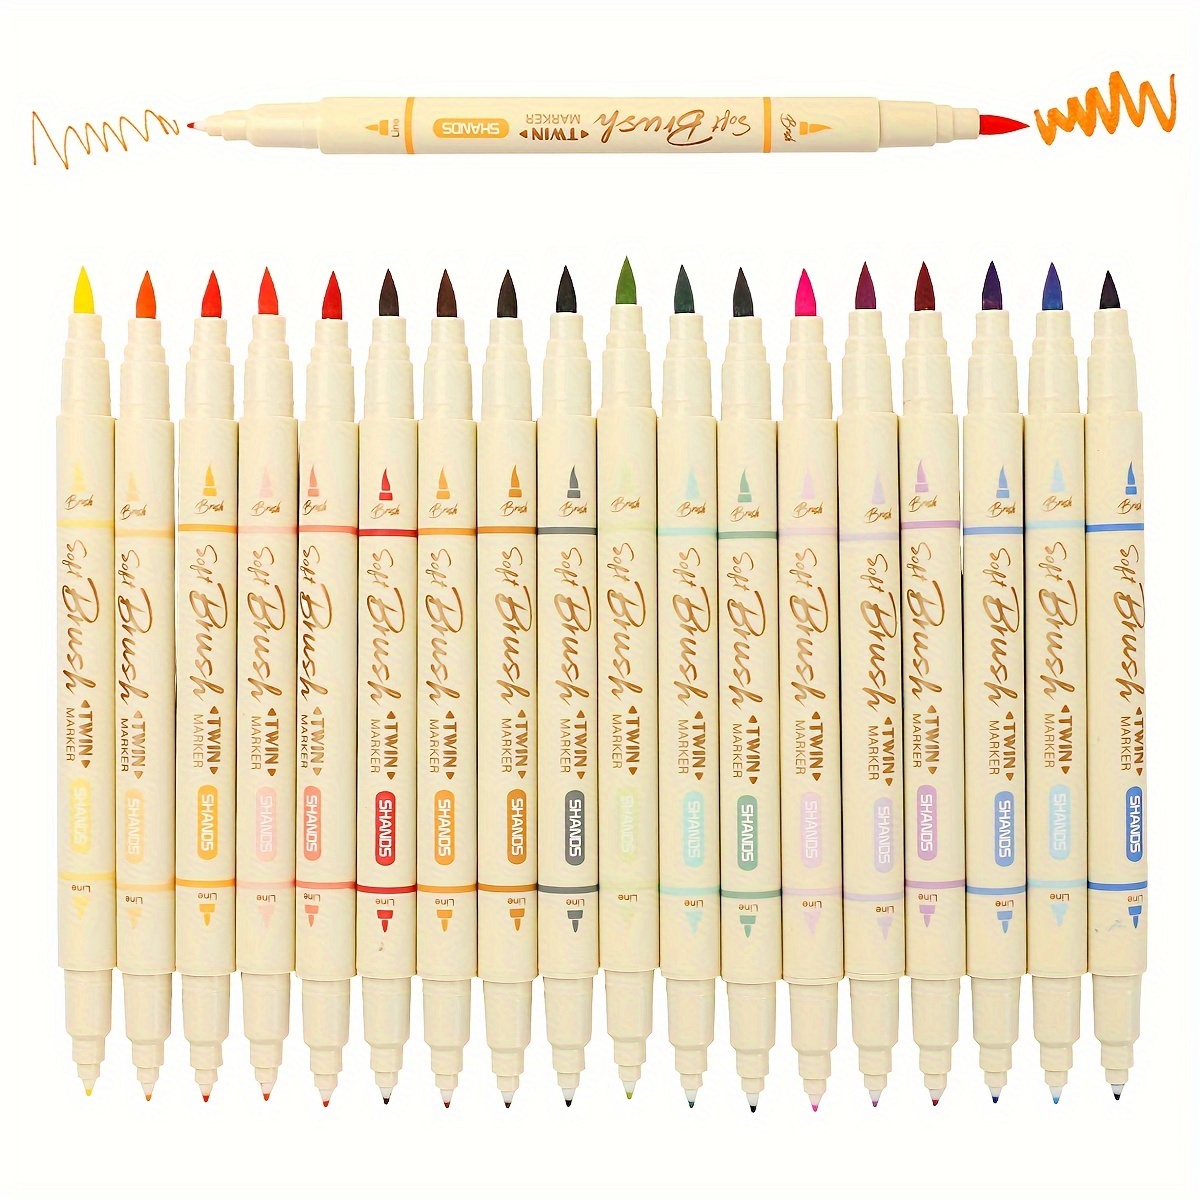 

18 Colors Dual Tip Art Marker Pens Set, Fine & Brush Point Plastic Drawing Pens For Coloring, Calligraphy, Painting, Journaling, Lettering - 3pcs Art Supplies For Adults